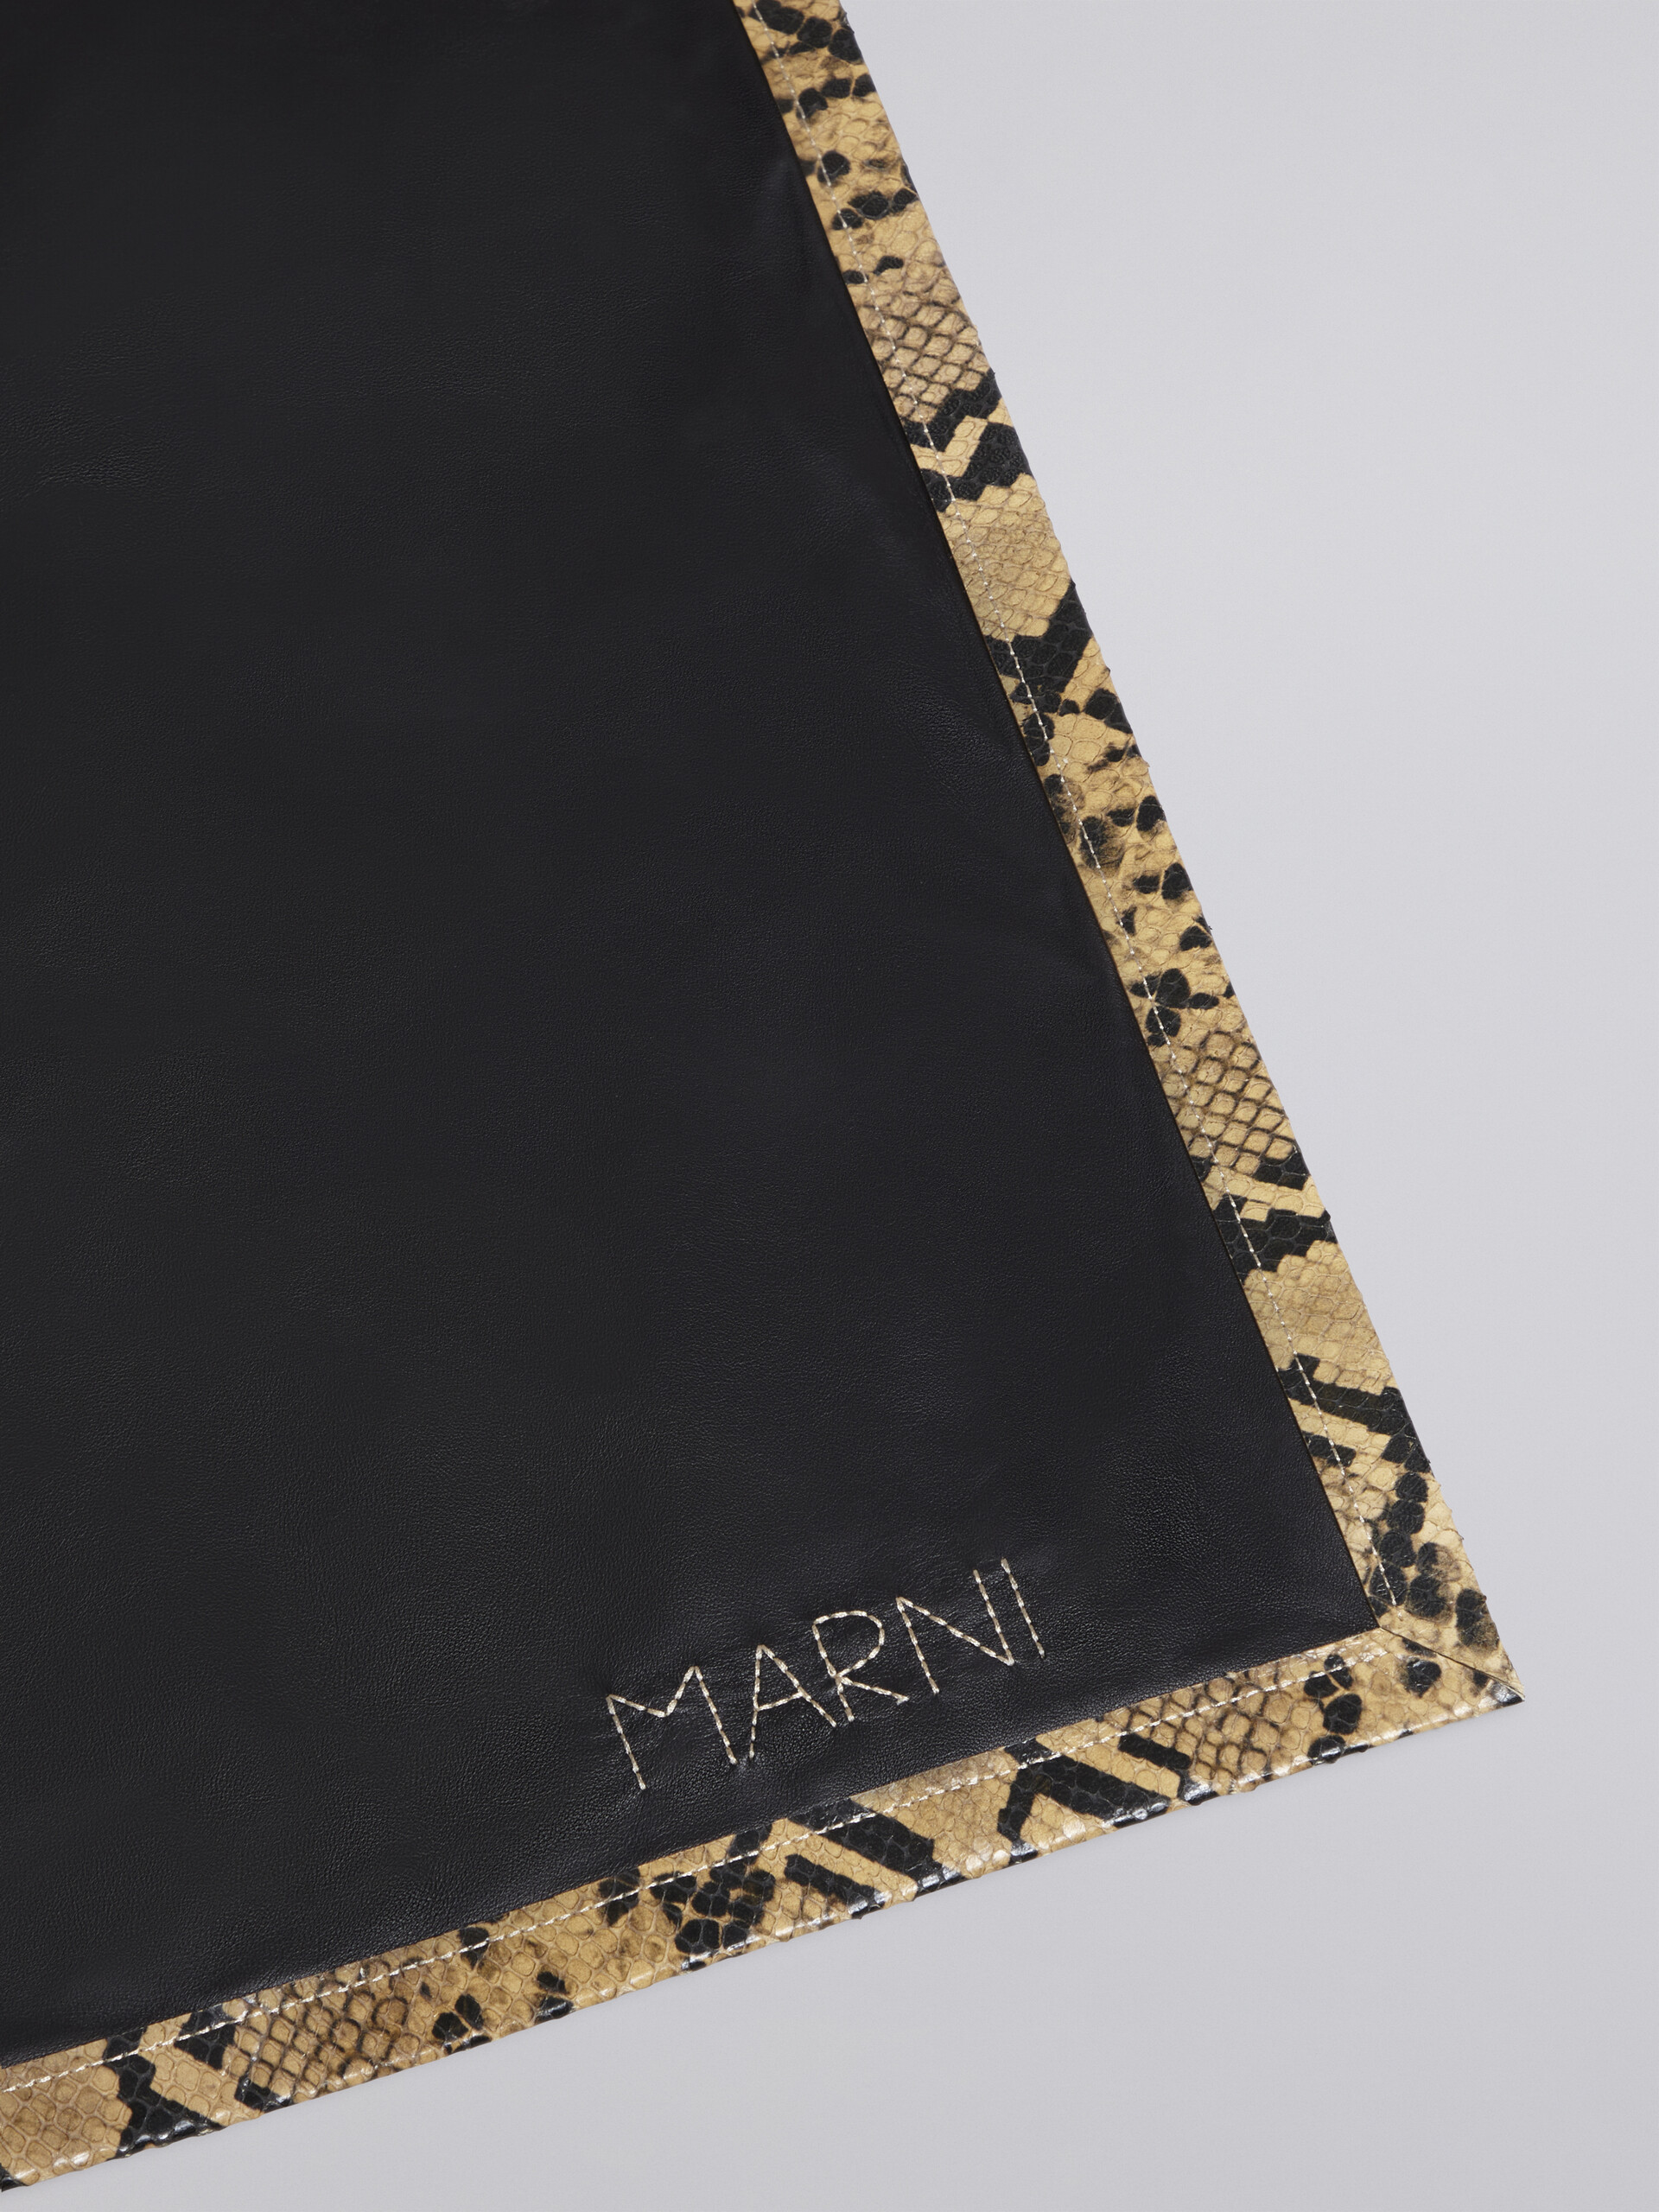 Black nappa triangular scarf with printed python finish - Other accessories - Image 4